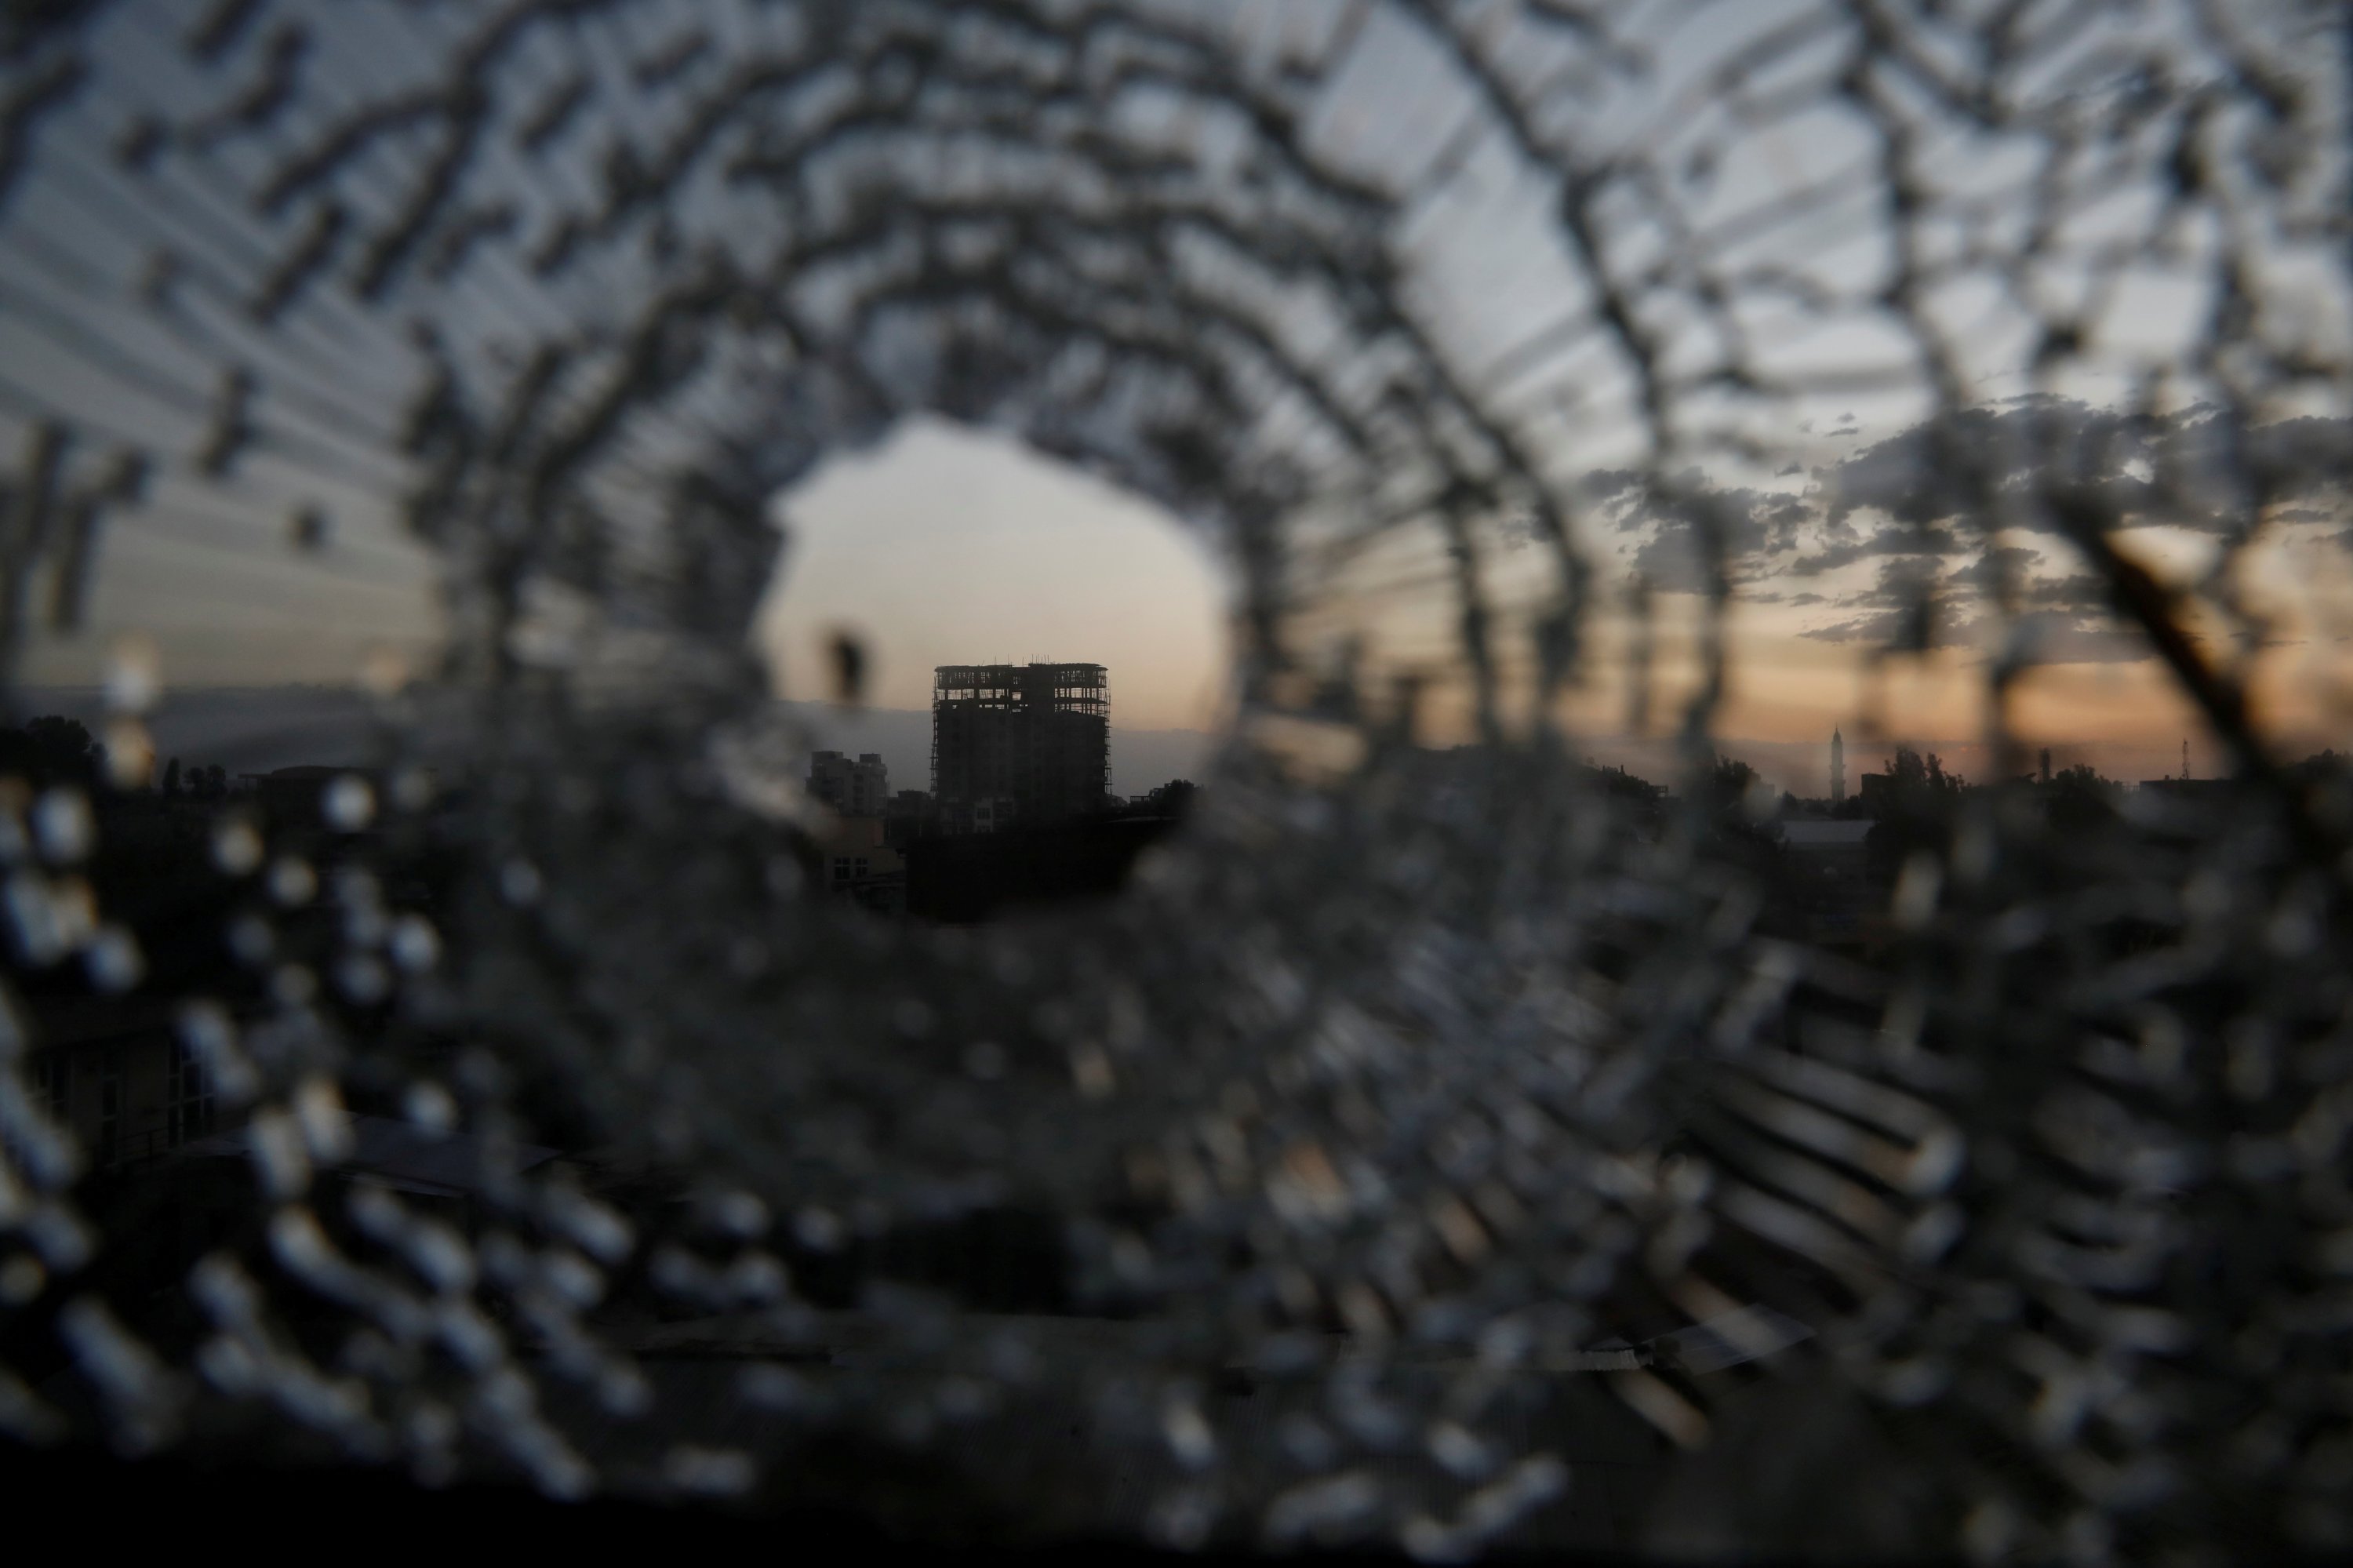 A building is seen through a bullet hole in a window of the Africa Hotel in the town of Shire, Tigray region, Ethiopia, March 16, 2021. (Reuters Photo)